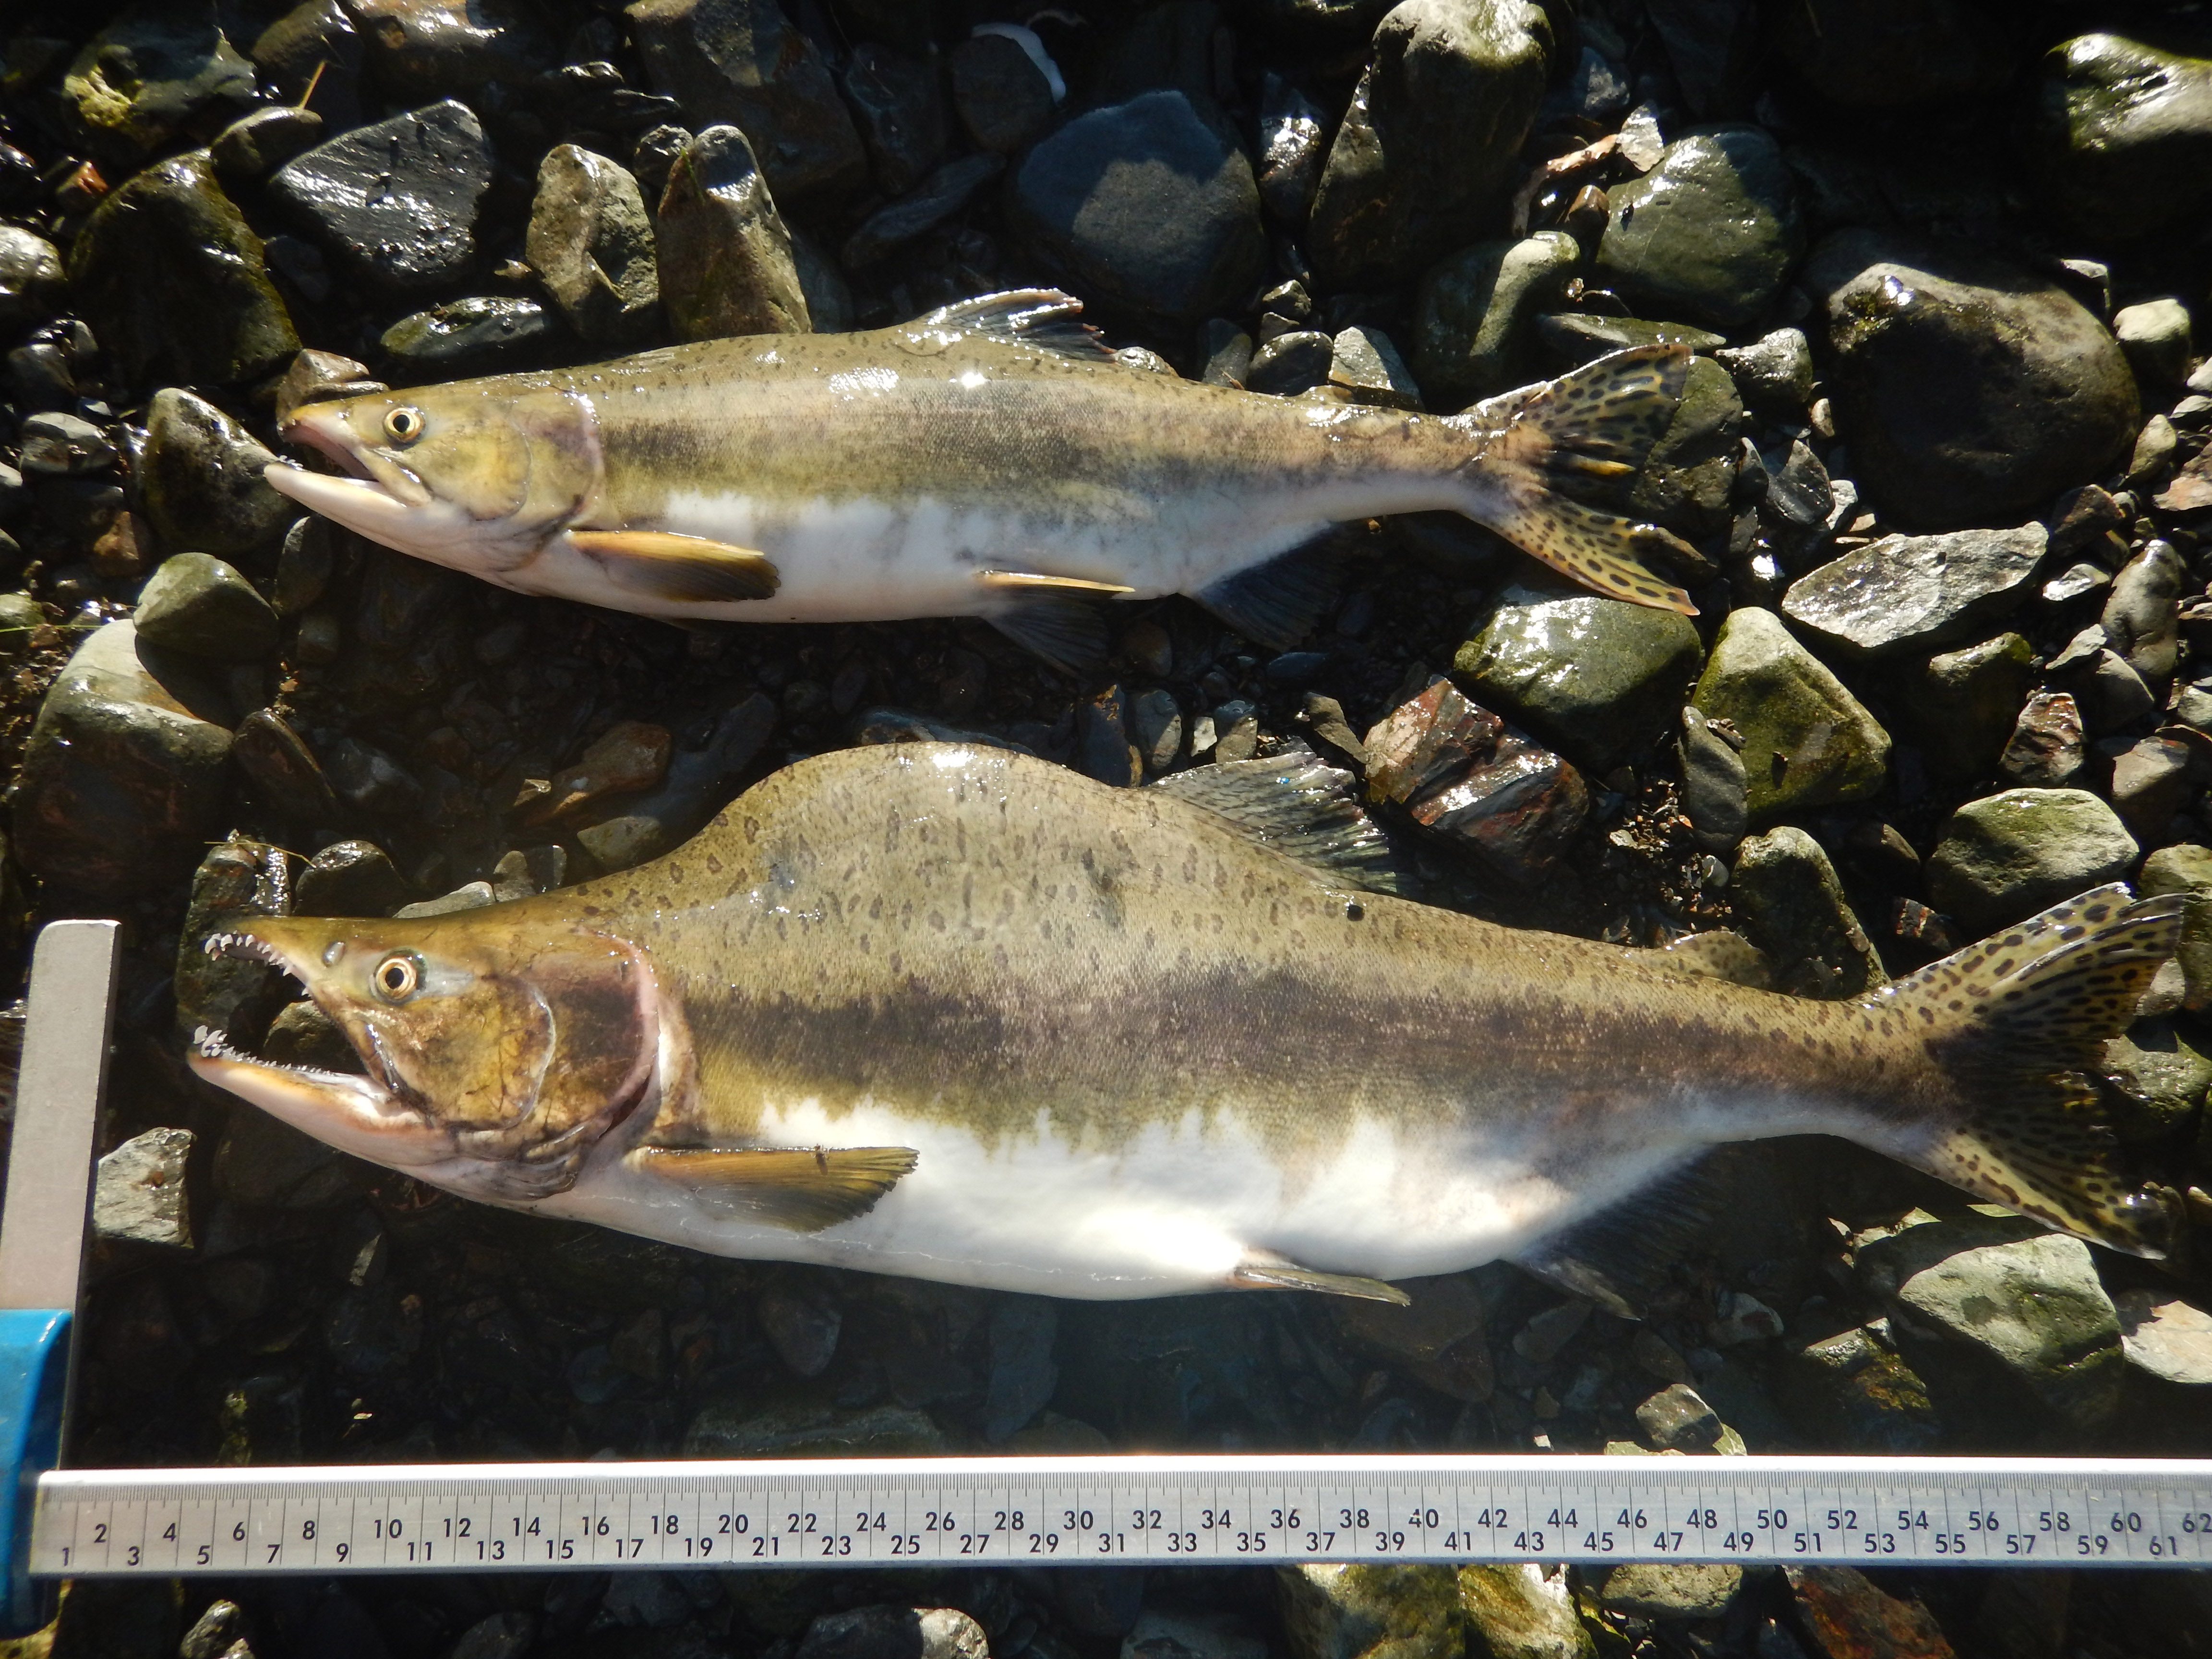 Differences between two male pink salmon highlight morphological diversity in the species.